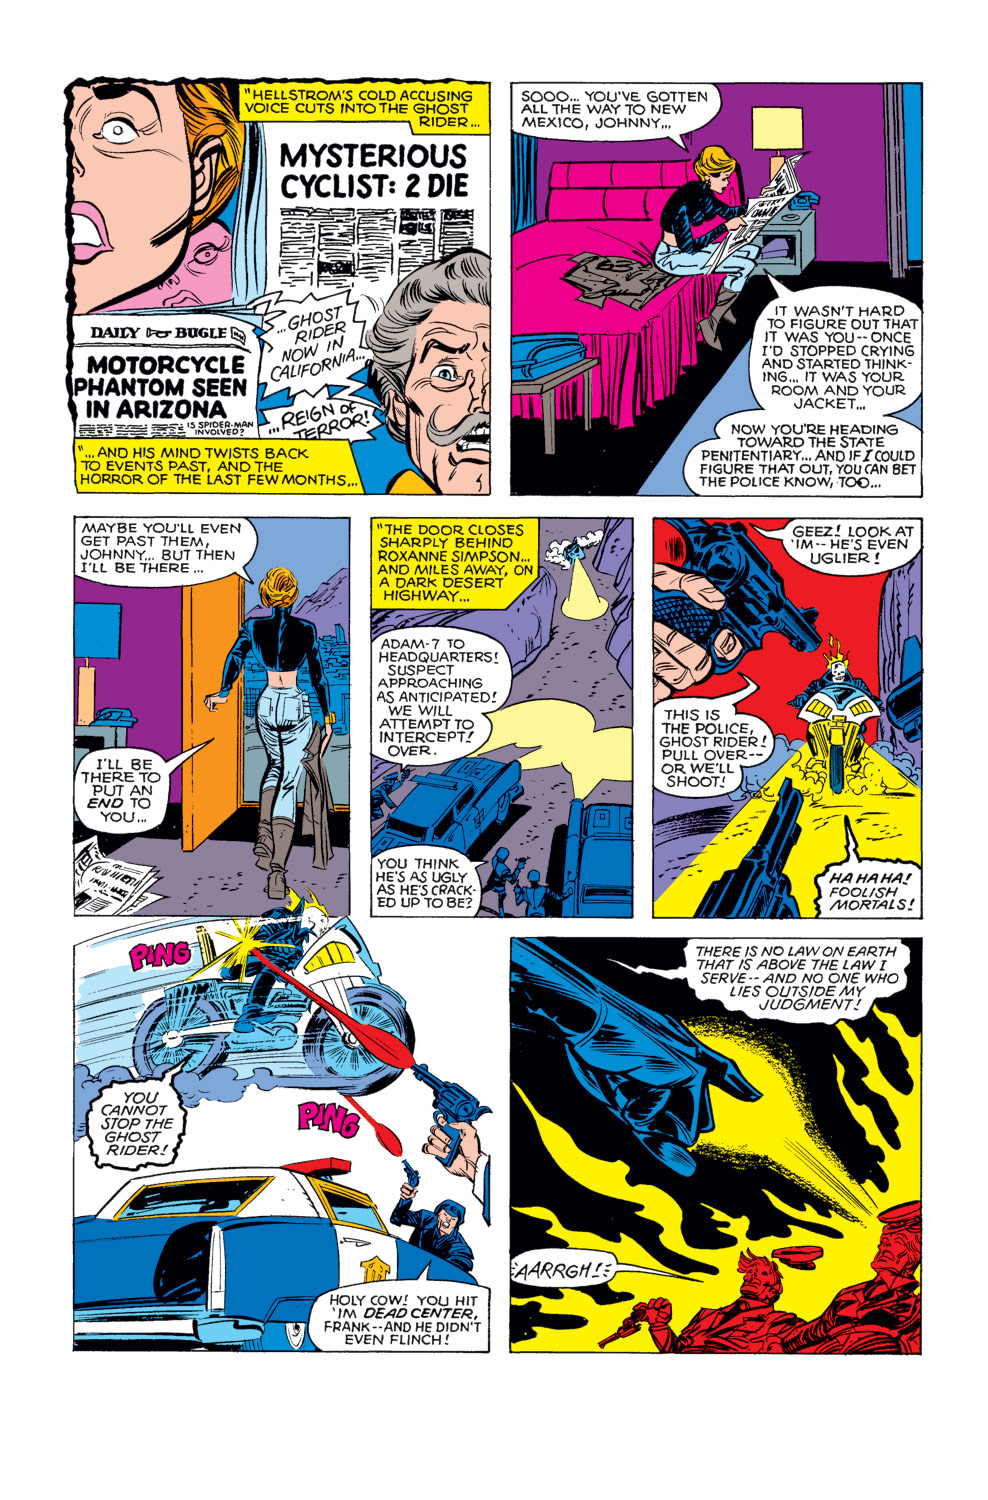 What If? (1977) issue 17 - Ghost Rider, Spider-Woman and Captain Marvel were villains - Page 10